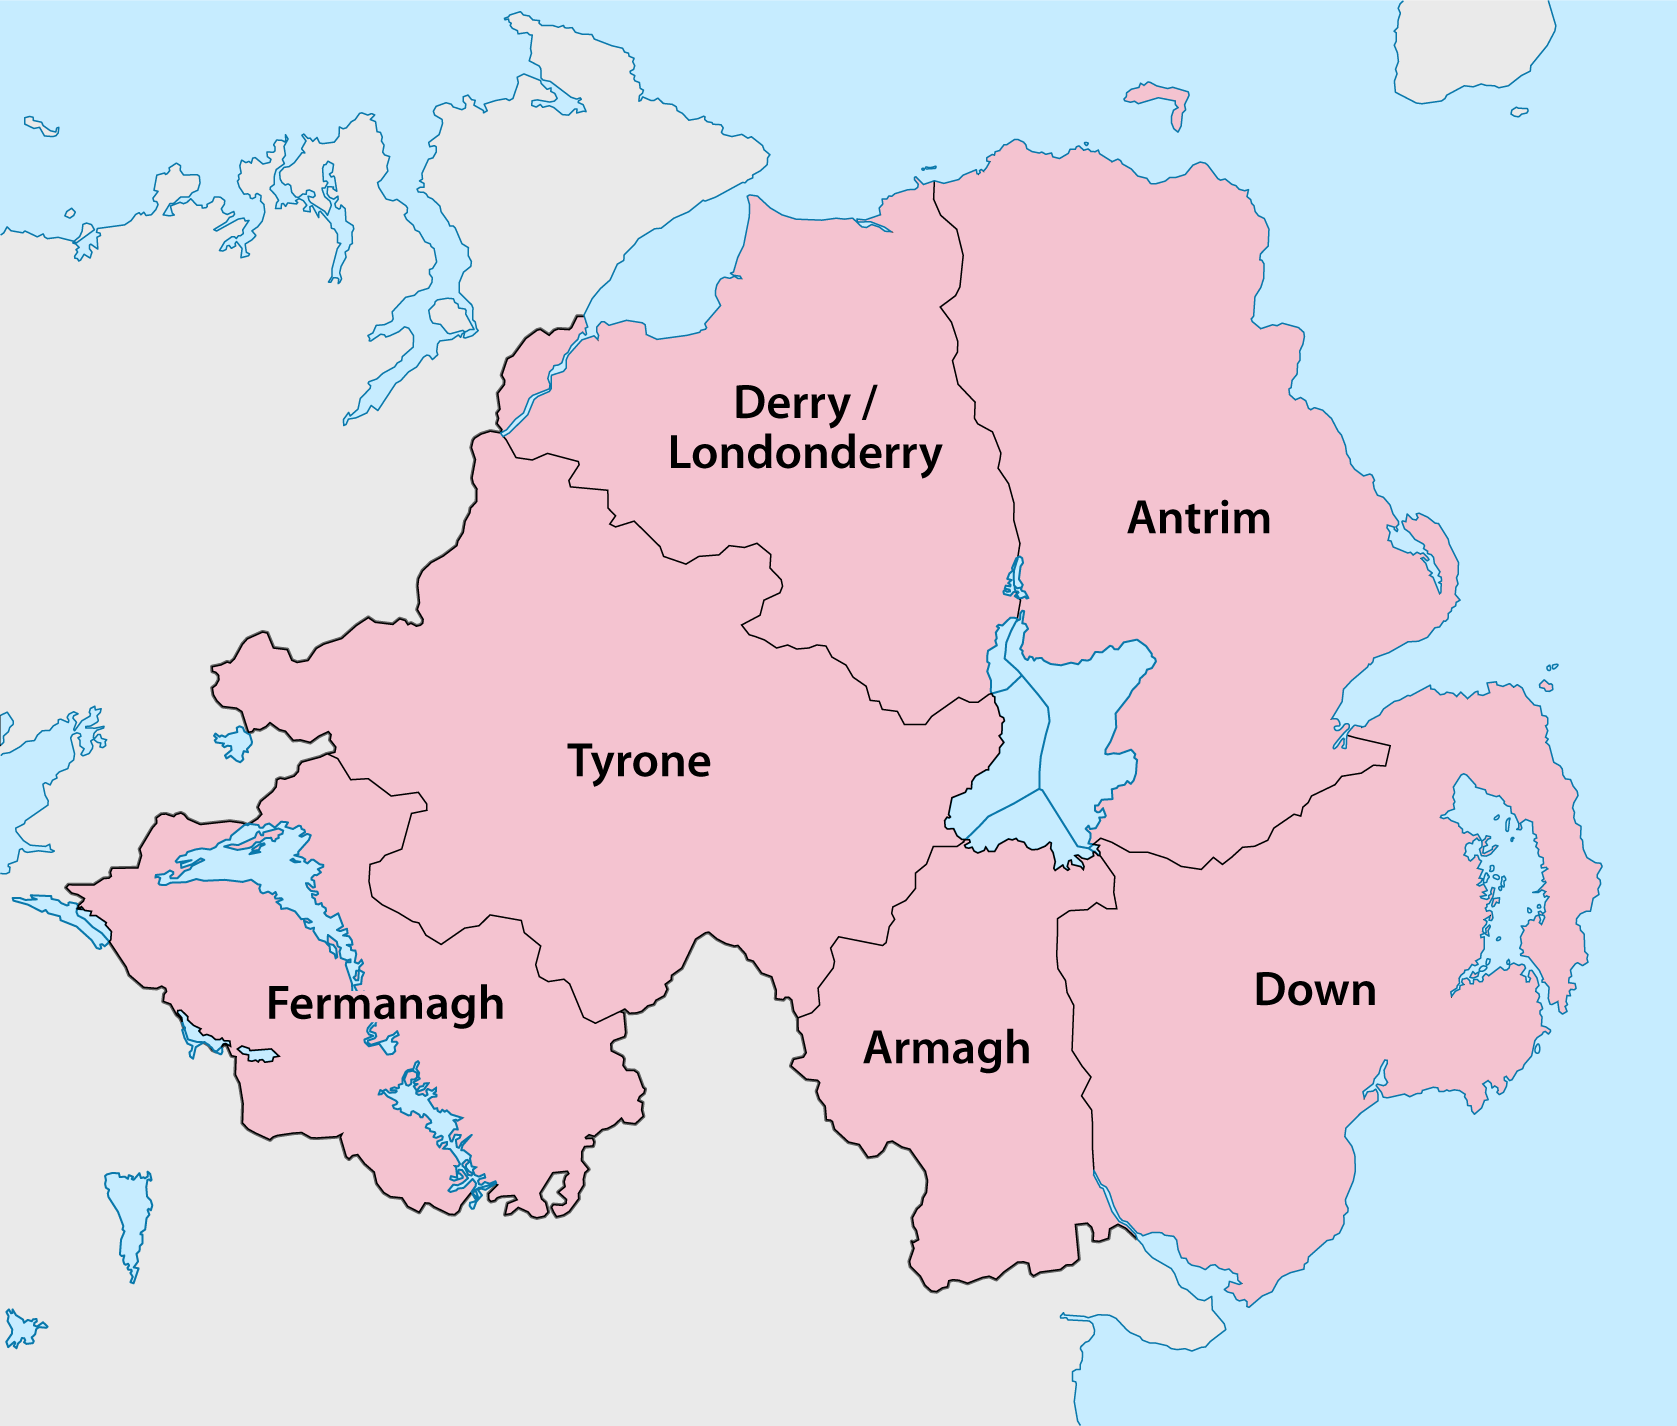 How Many Counties are in Northern Ireland?